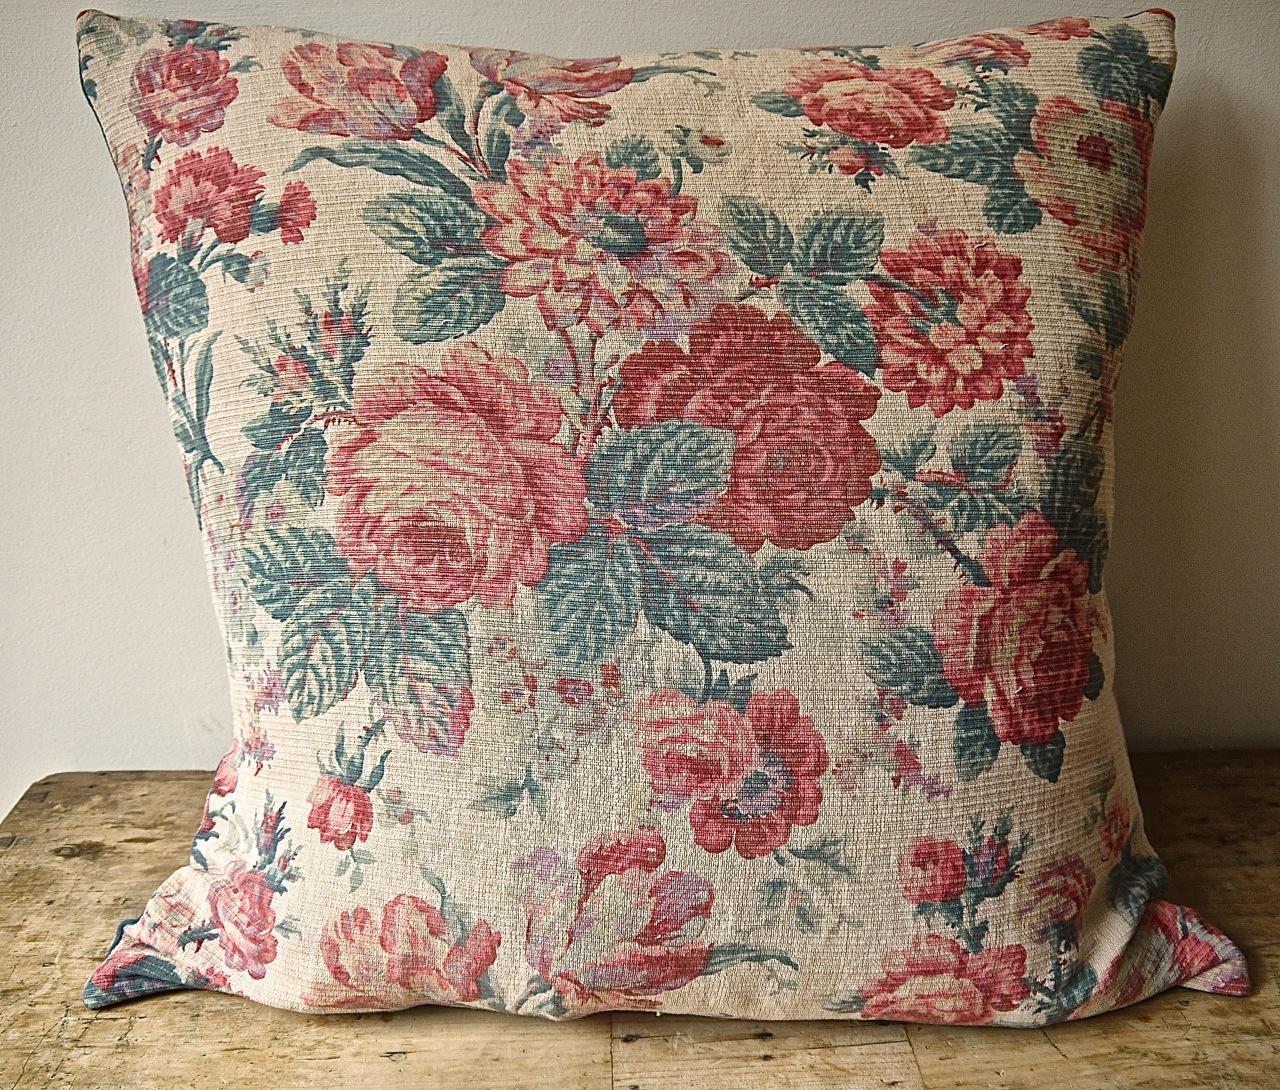 French early 20th century textured linen cushion with a large-scale design of a roses and tulips in pretty soft colors.
Backed in a hand-dyed French 19th century linen. Slip-stitched closed with a duck feather cushion pad.